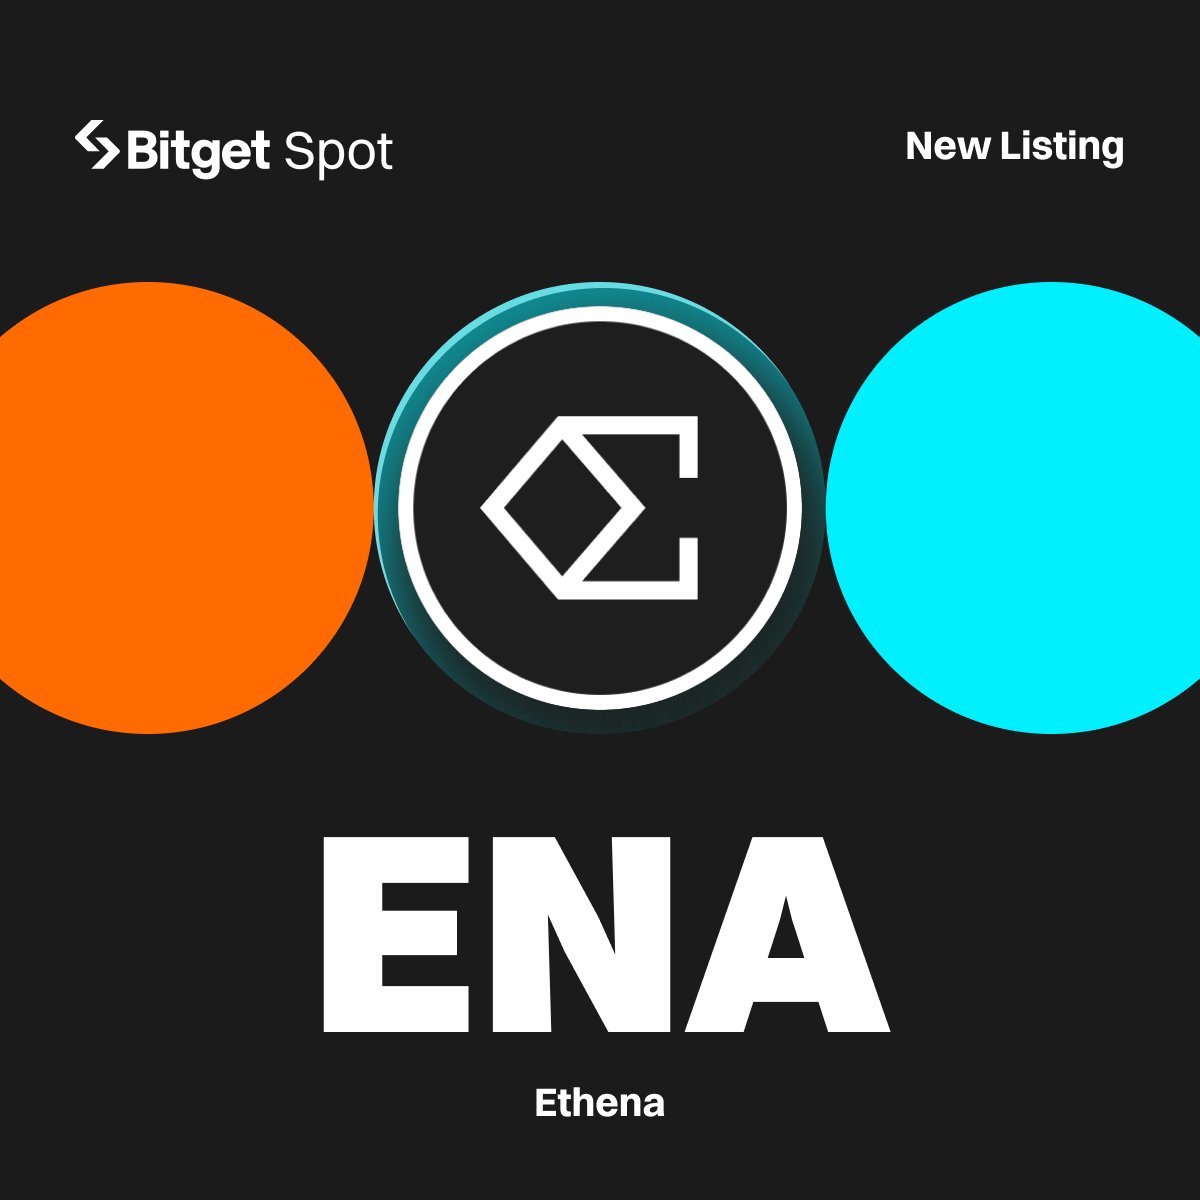 Join hands with $ENA and $Bitget to unlock a world of opportunities in the #cryptospace. The time is now! #ENAListBitget @ethena_labs @bitgetglobal @BitgetWallet @BitgetSupport #BitgetChallenge #BitcoinETF #CryptoCommunity #NFTs #BinanceCoin #Solana #BitgetListing #Bitcoin